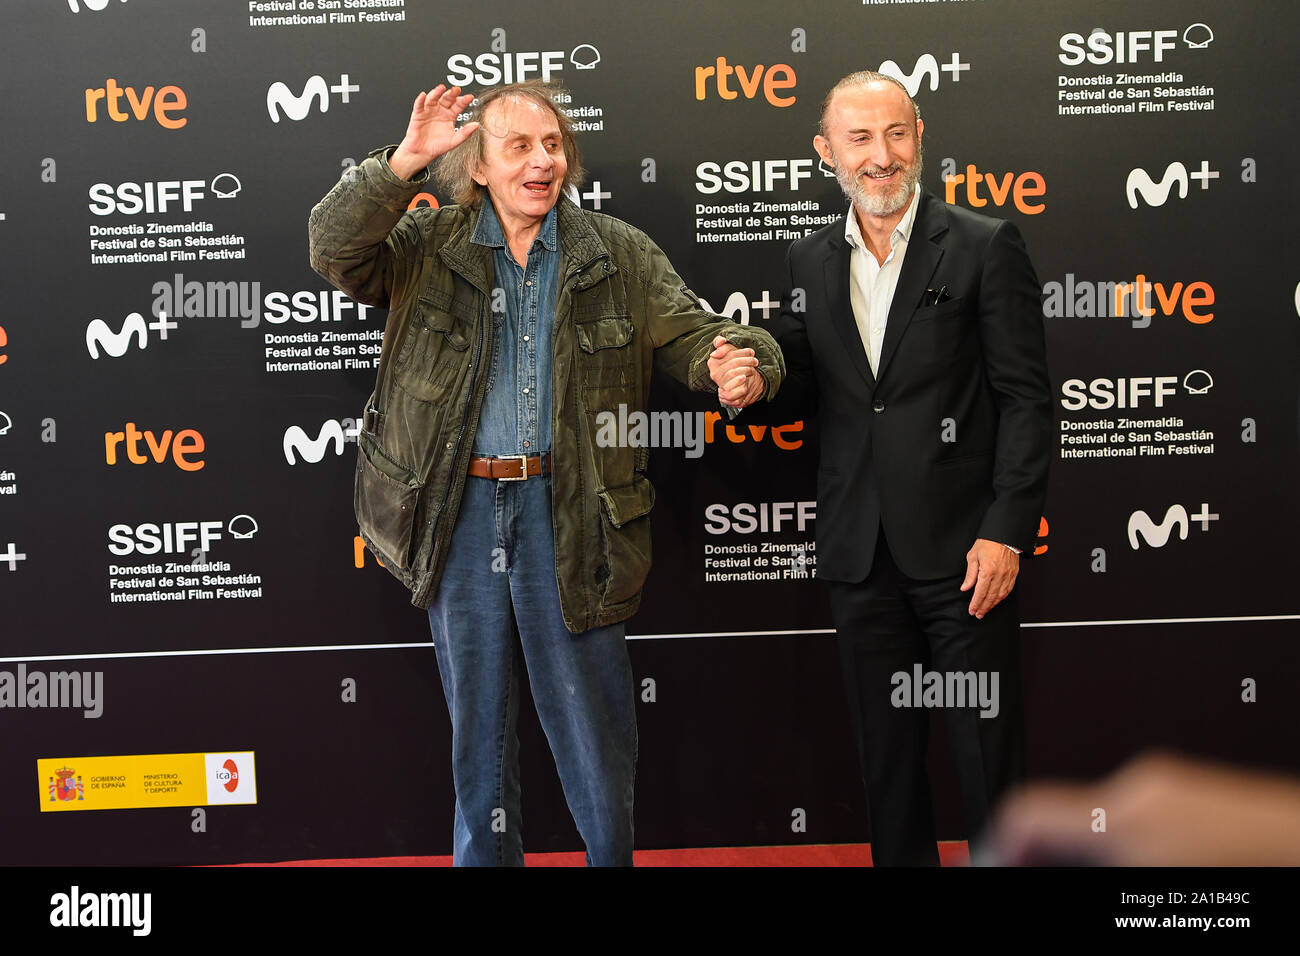 San Sebastian, Spain. 25th September 2019. Michel Houellebecq and Guillaume Nicloux attend photocall for the film 'Thalasso' at the 67th International Film Festival of San Sebastian. Credit: Julen Pascual Gonzalez/Alamy Live News Stock Photo